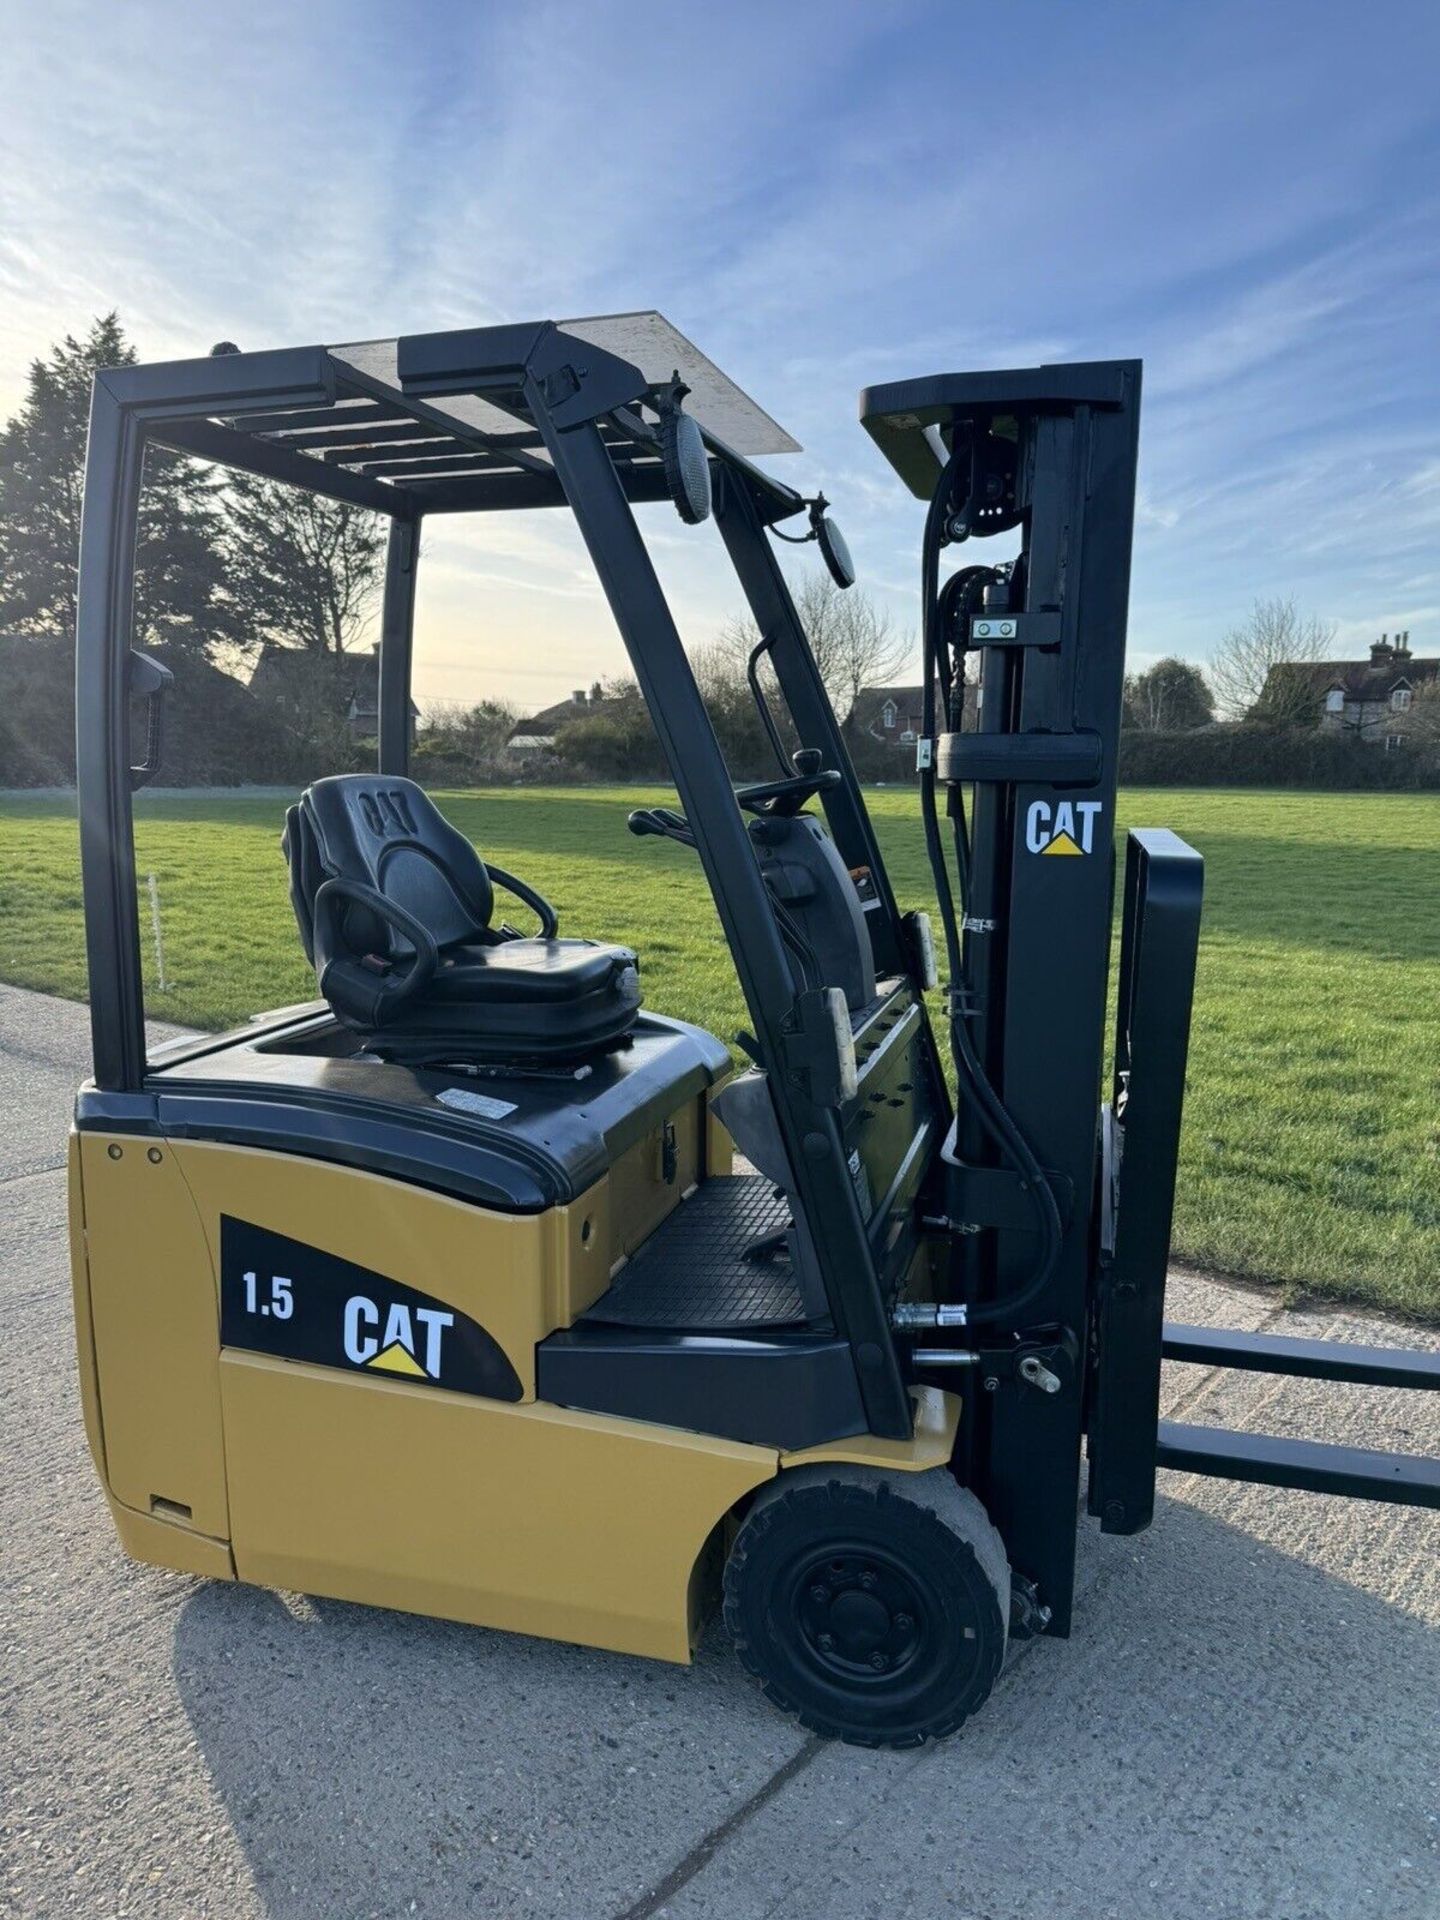 2017, CATERPILLAR - 1.5 Electric Forklift Truck (Container Spec) - Image 3 of 5